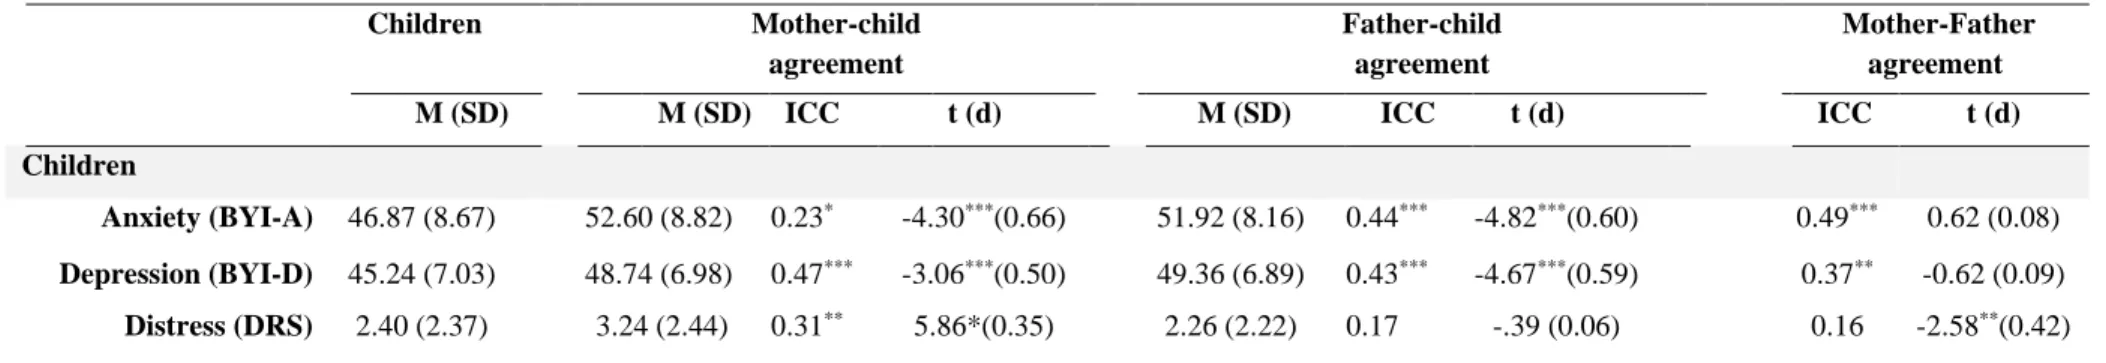 TABLE 2  Agreement on child anxiety, depression and distress in 62 mother-father-child triads of children treated for acute lymphoblastic leukemia Children  Mother-child  agreement  Father-child  agreement   Mother-Father  agreement 